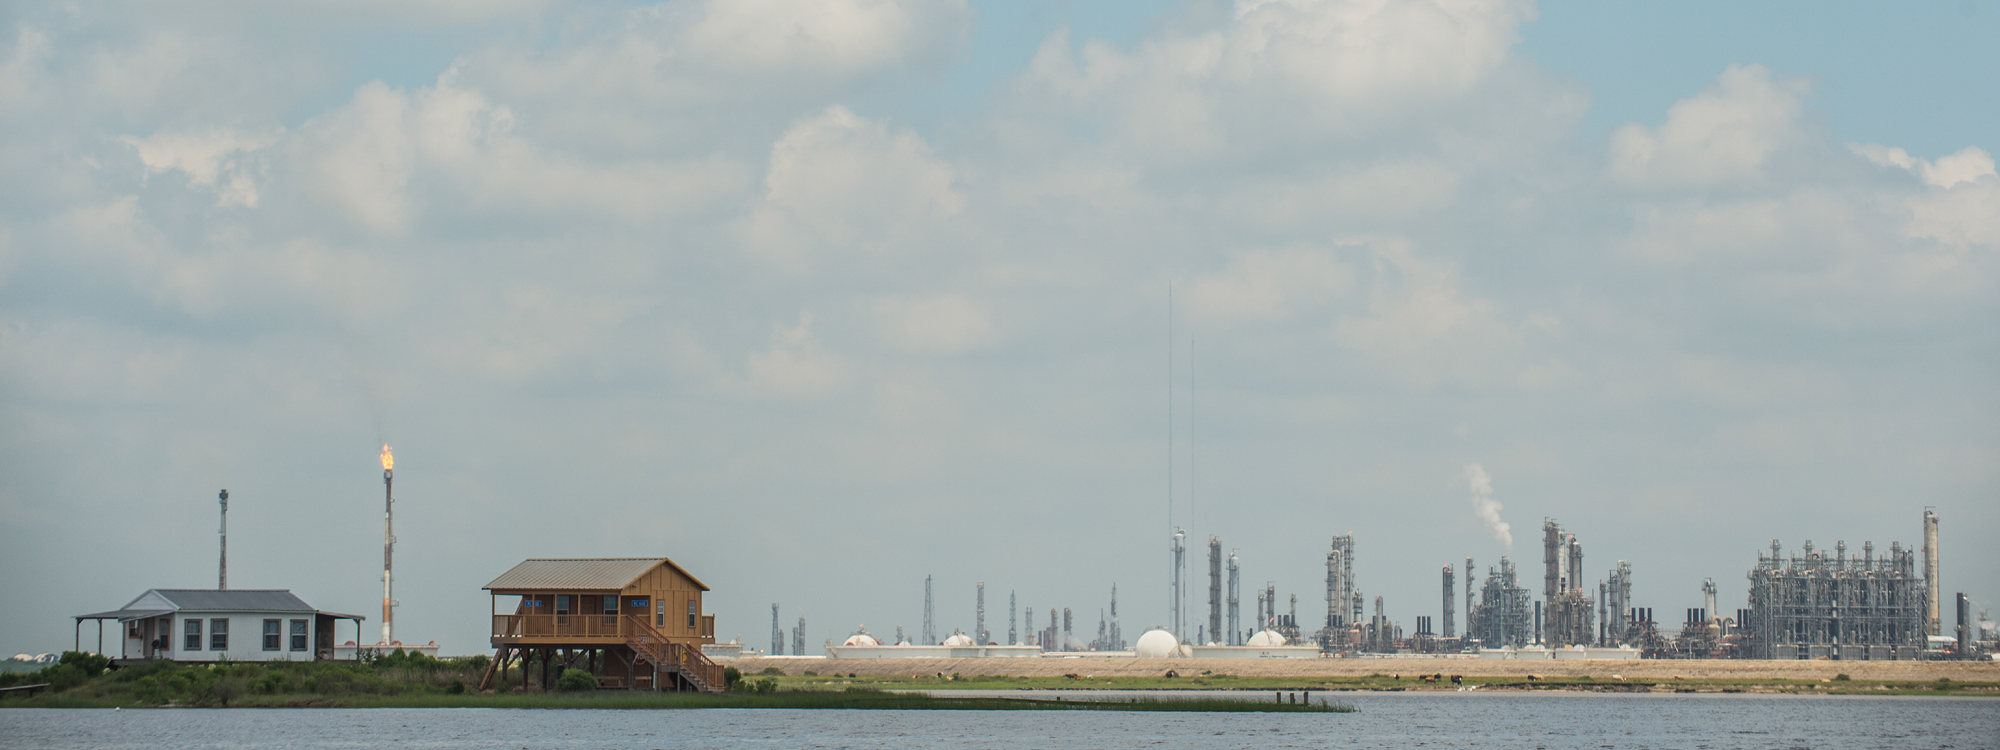 Homes in front of an oil refinery across the water